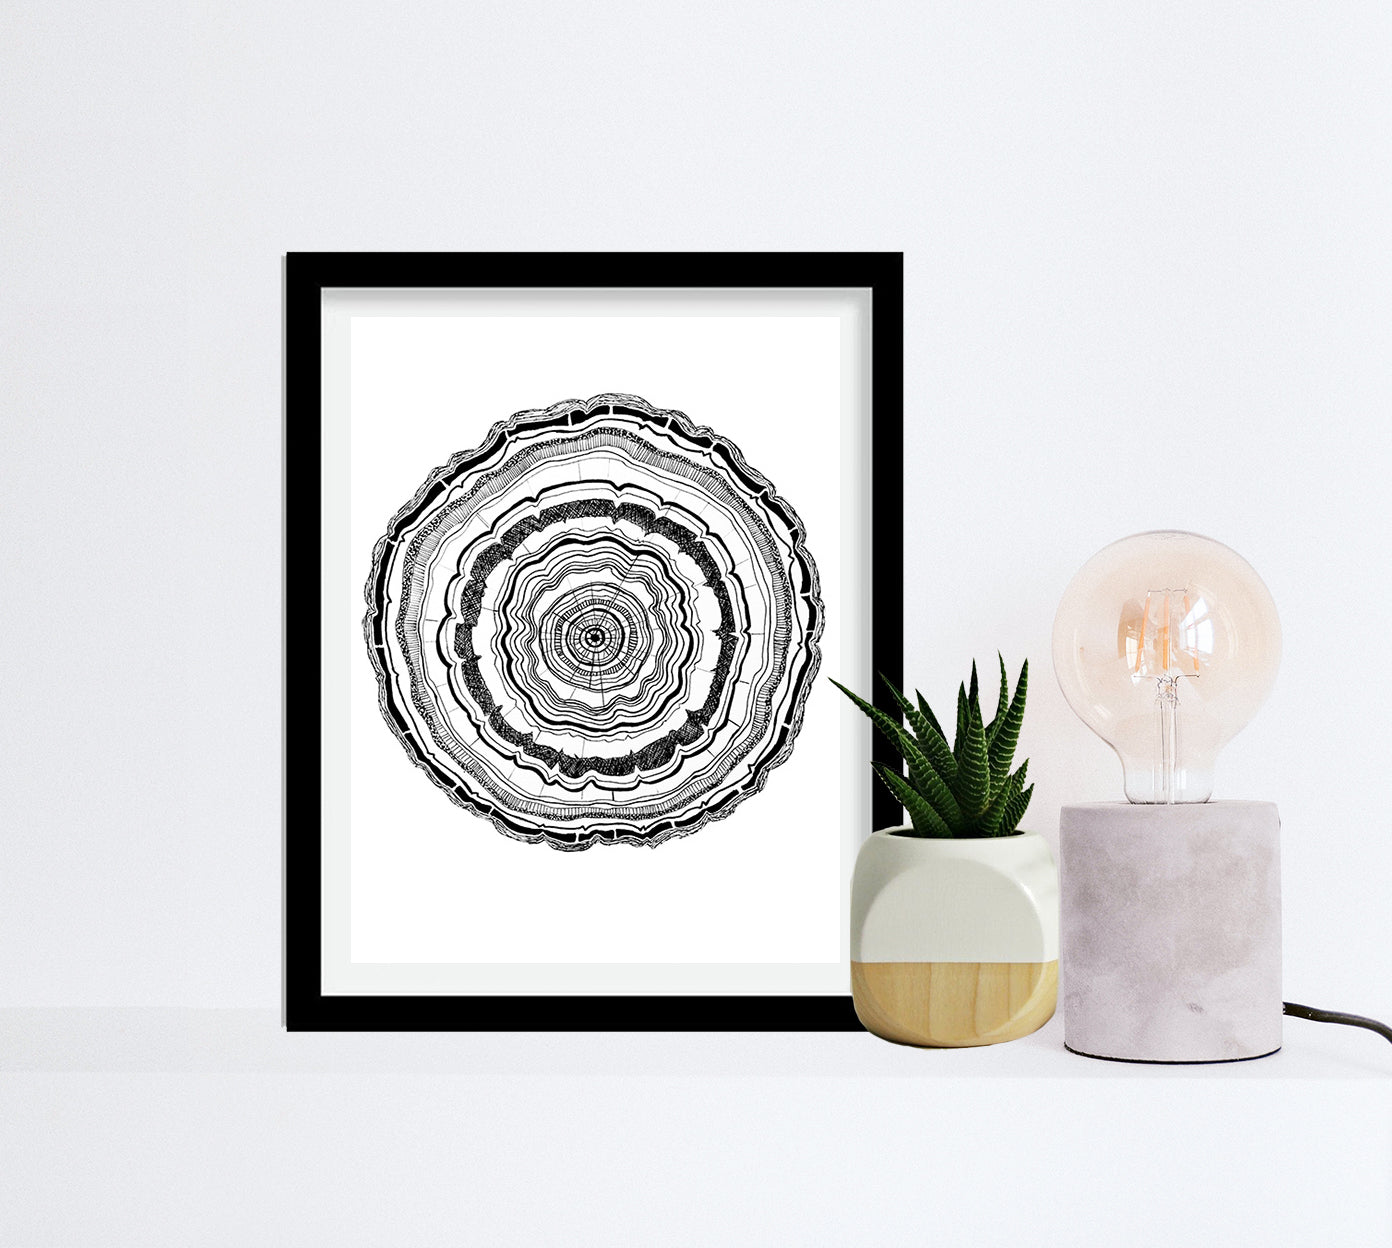 Tree Rings 8x10 Art Print by Tanya Madoff, black and white illustration